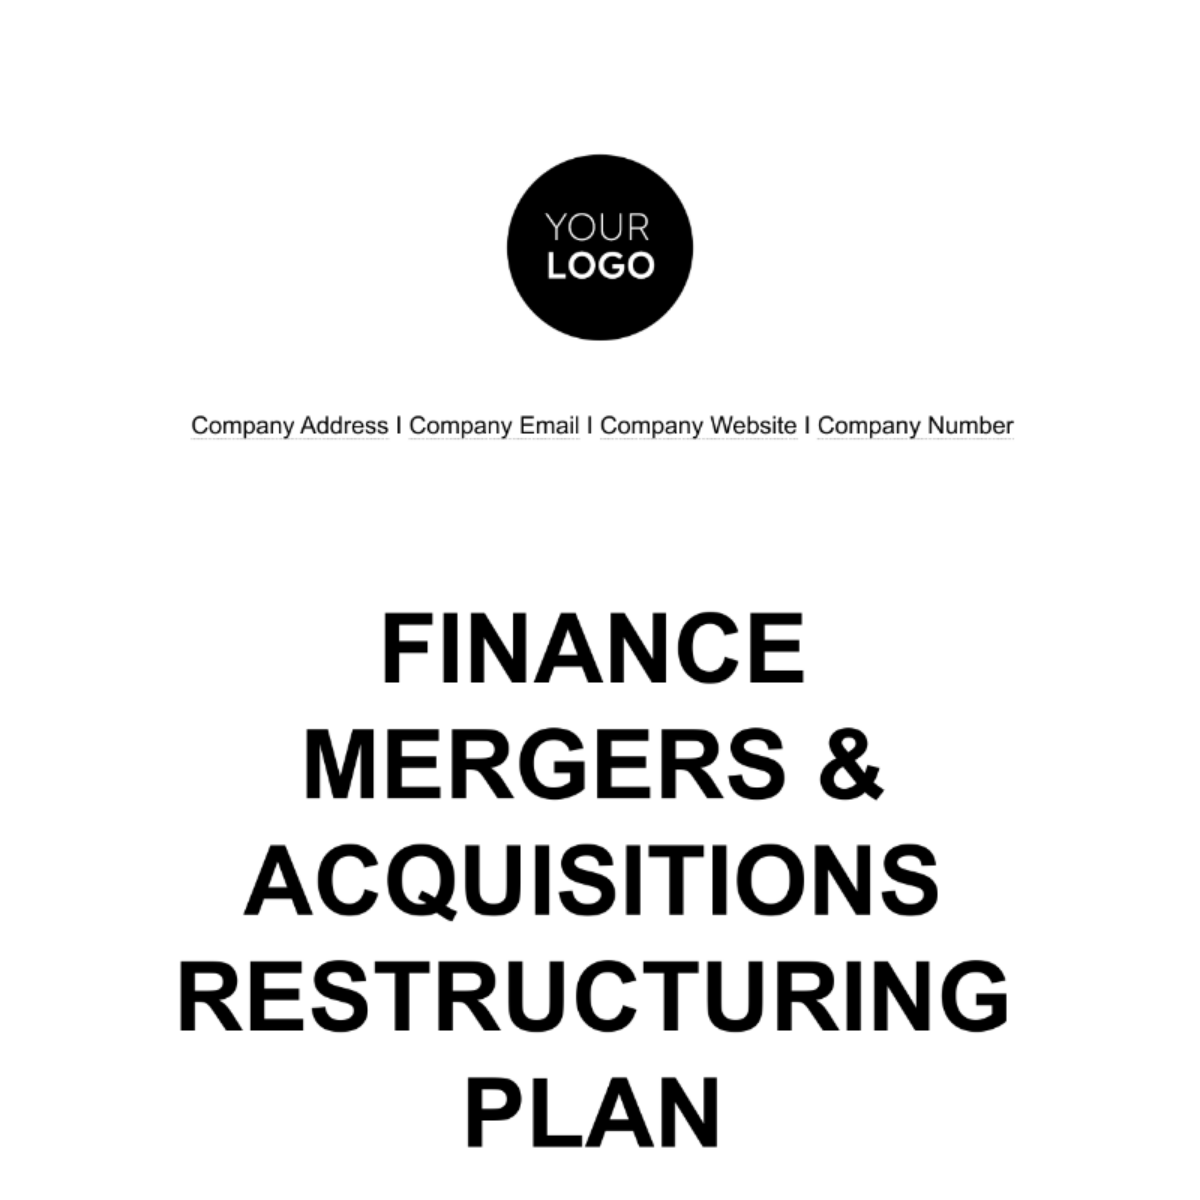 Free Finance Mergers & Acquisitions Restructuring Plan Template